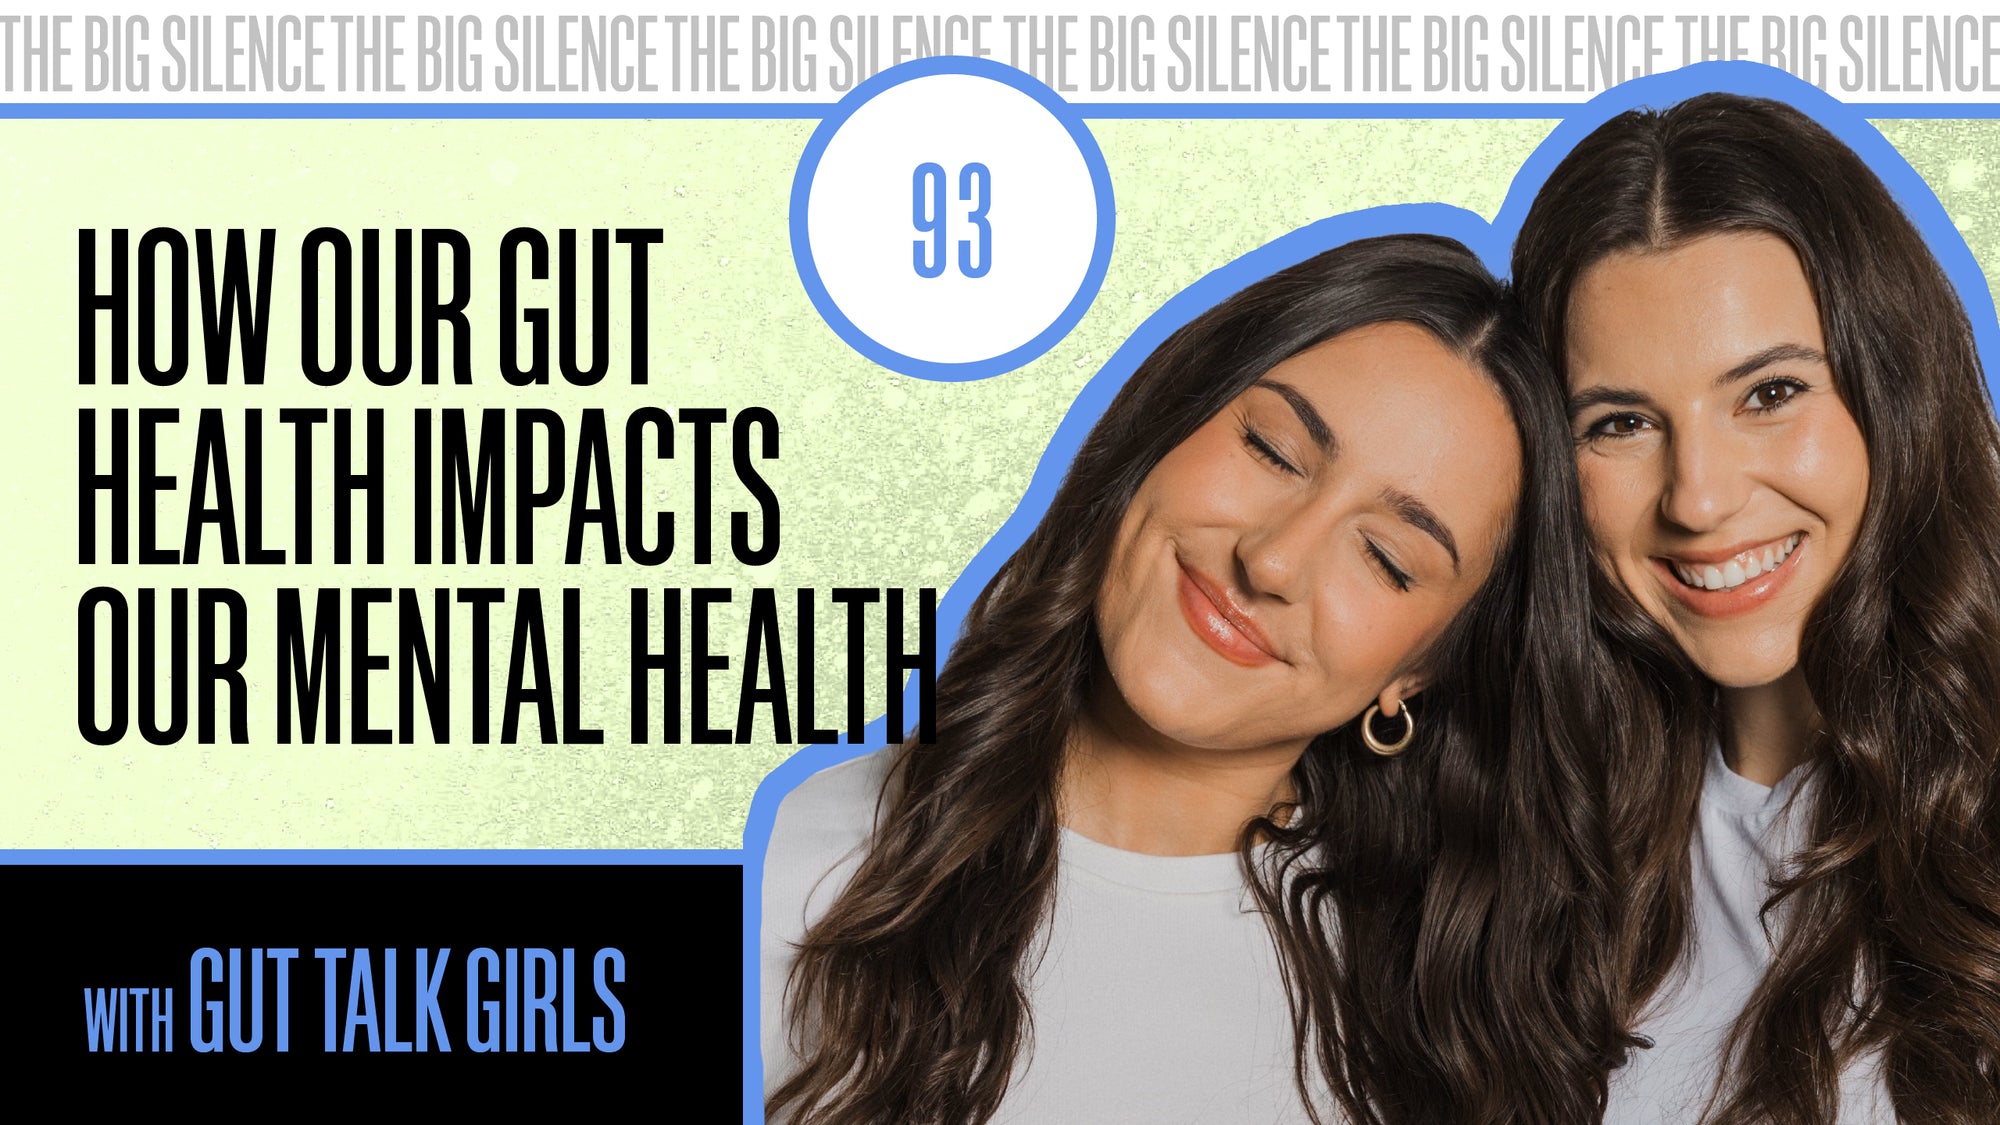 93. THE GUT TALK GIRLS ON HOW OUR GUT HEALTH IMPACTS OUR MENTAL HEALTH